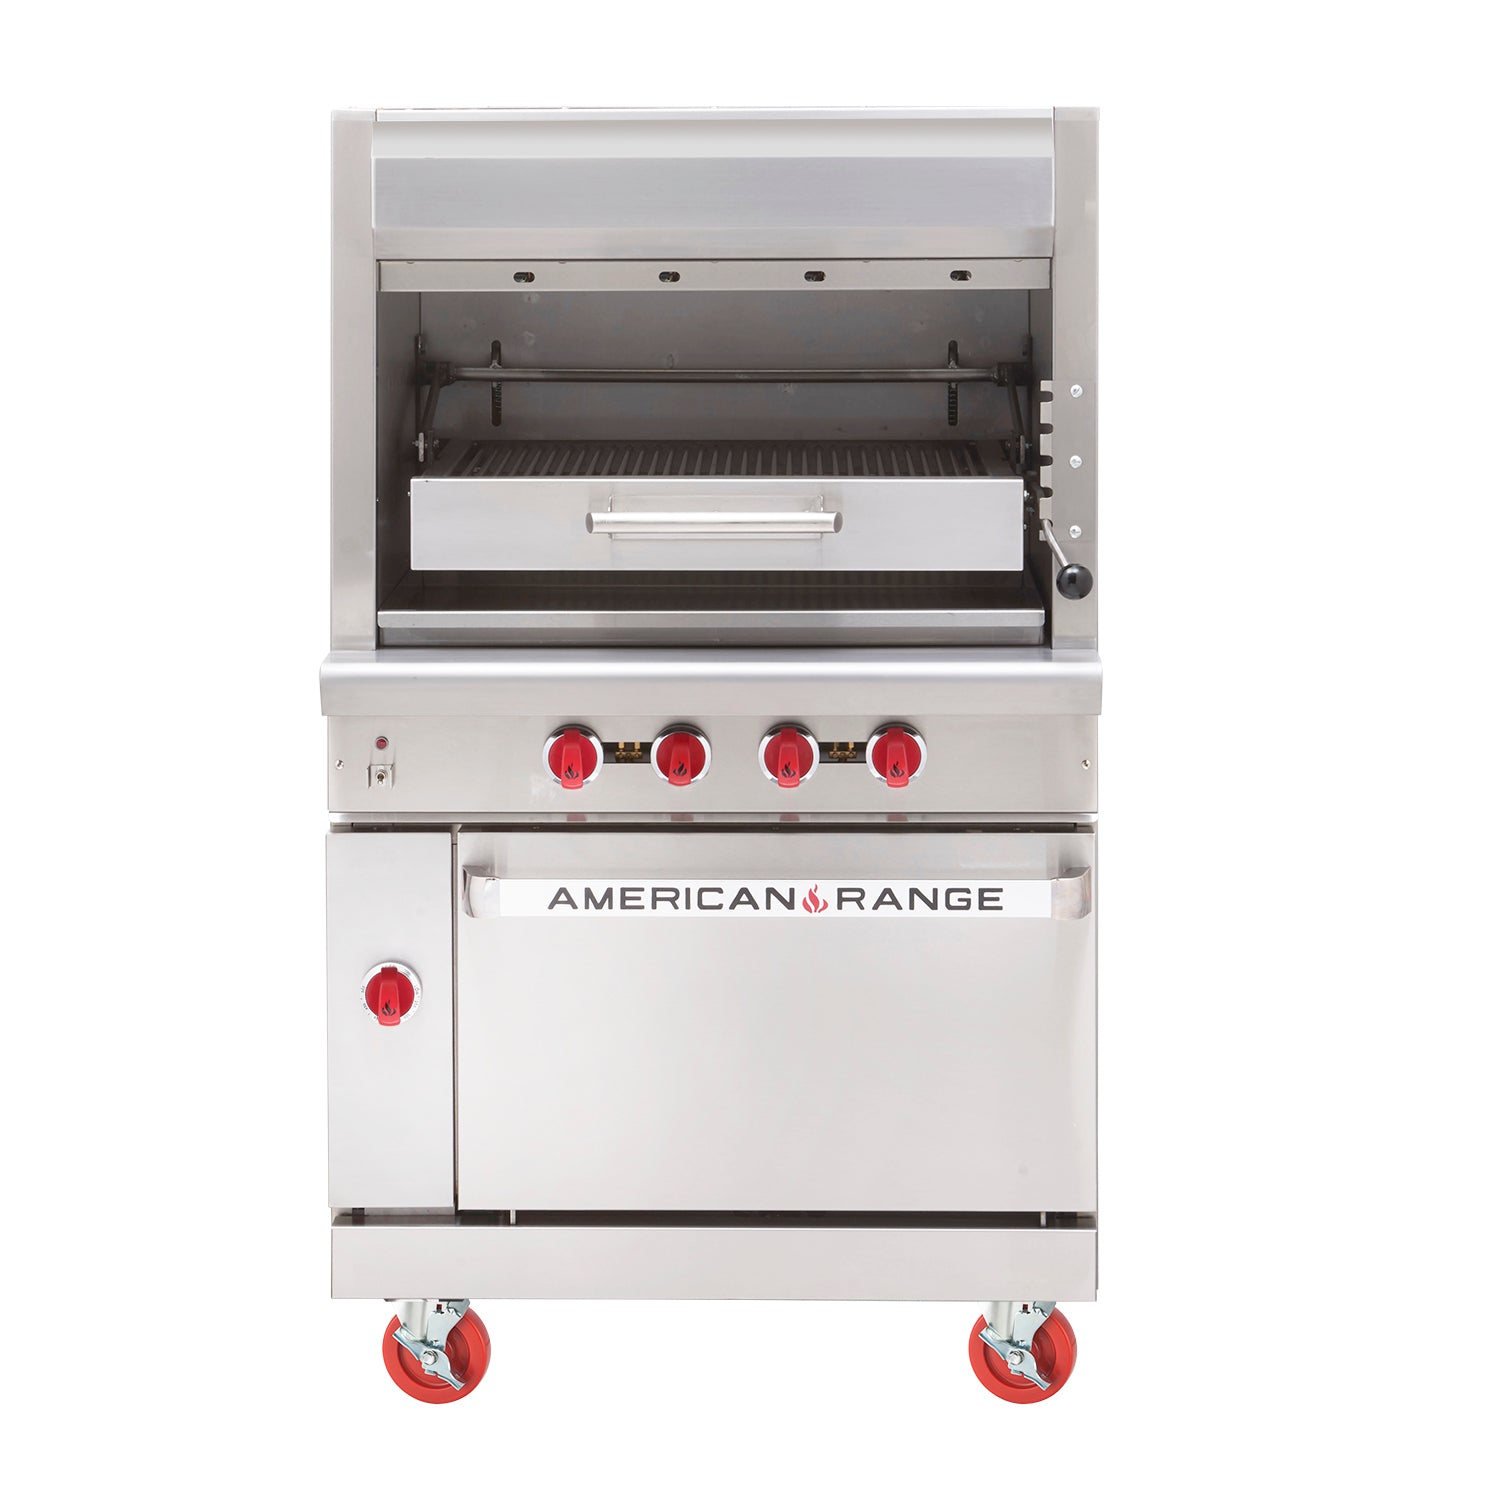 Infrared Broilers with Lower Oven